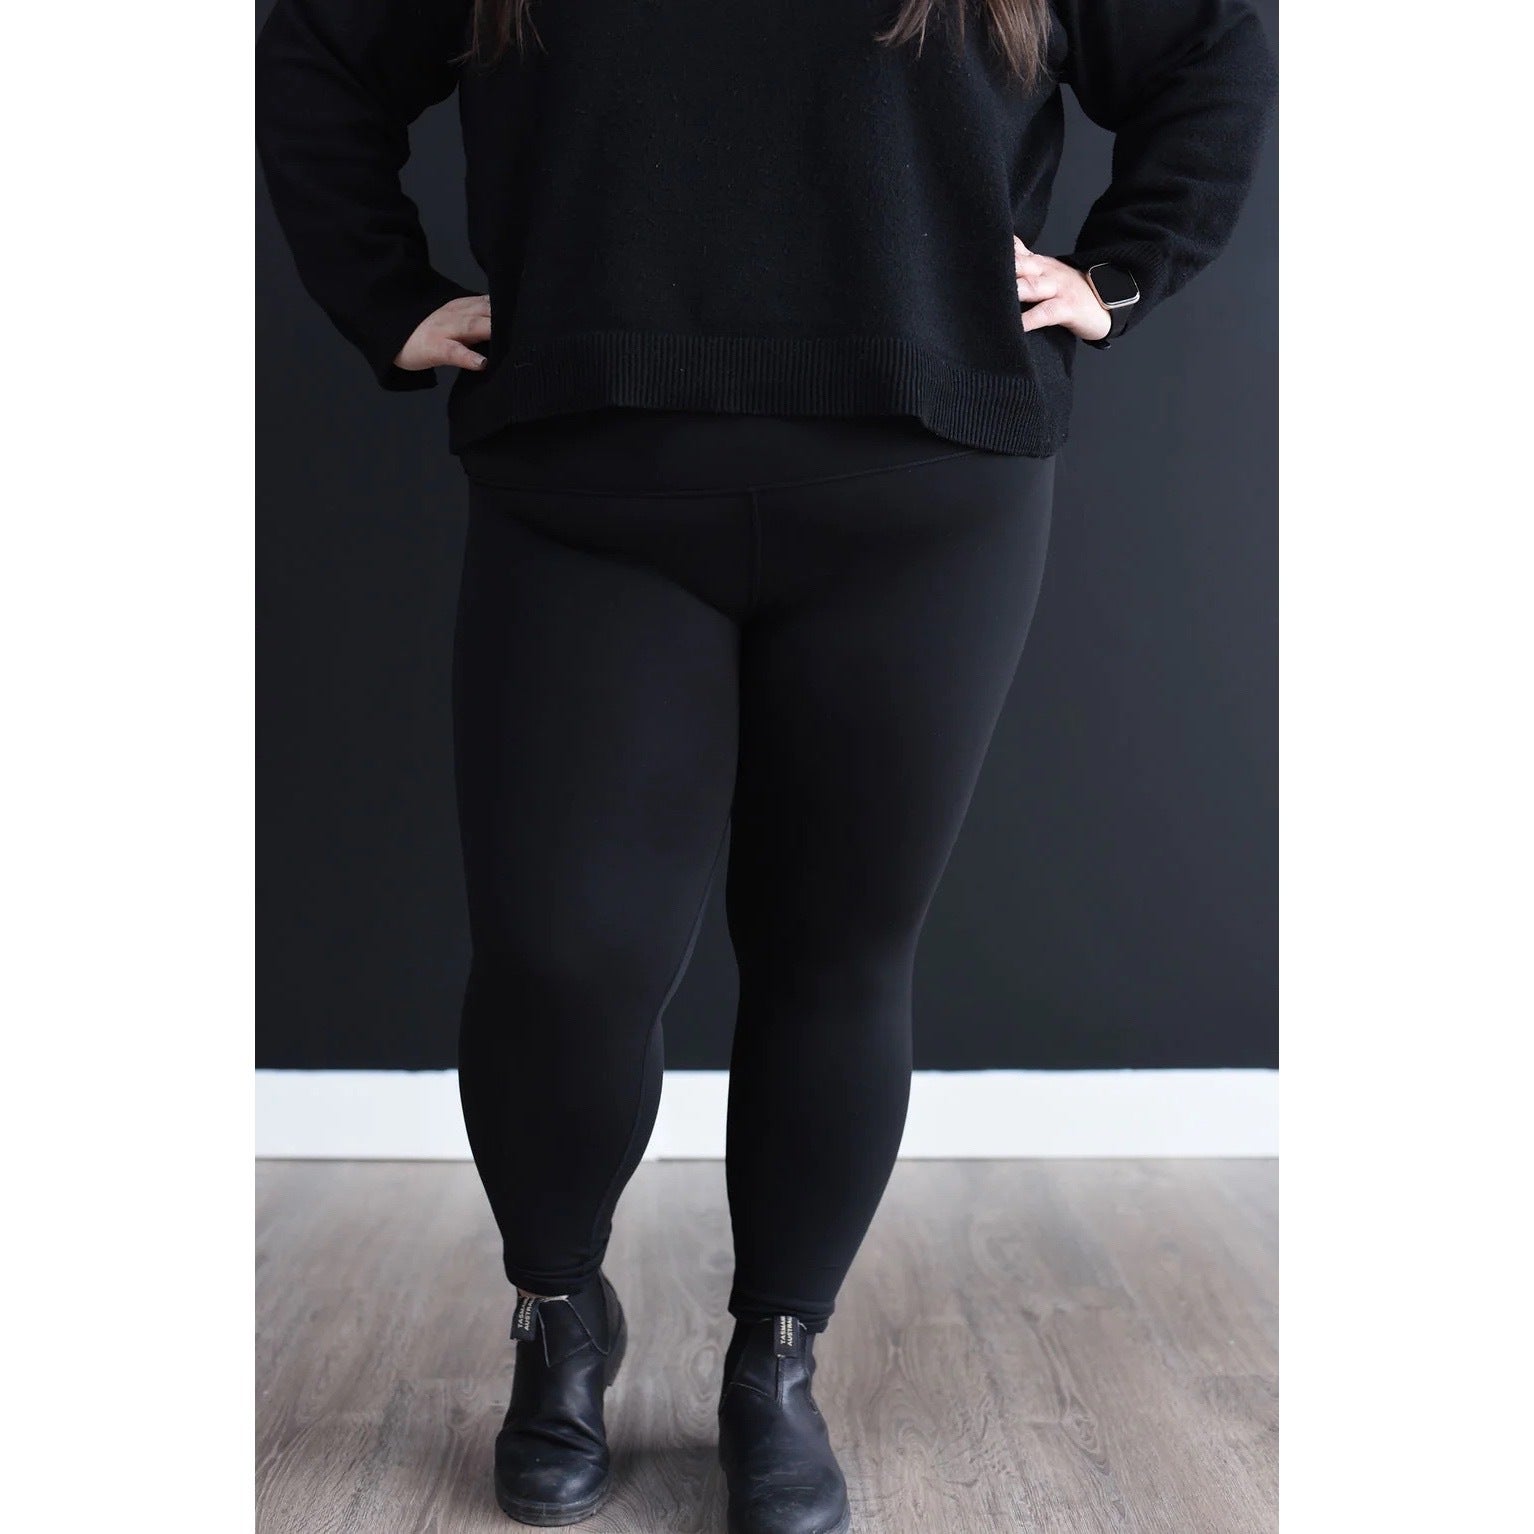 Buy SHAPERX Thick Fur Lined Warm Slim Fit Women Winter Thermal Soft Fleece Legging  Plus Size Pack of 1 (S, Black) at Amazon.in